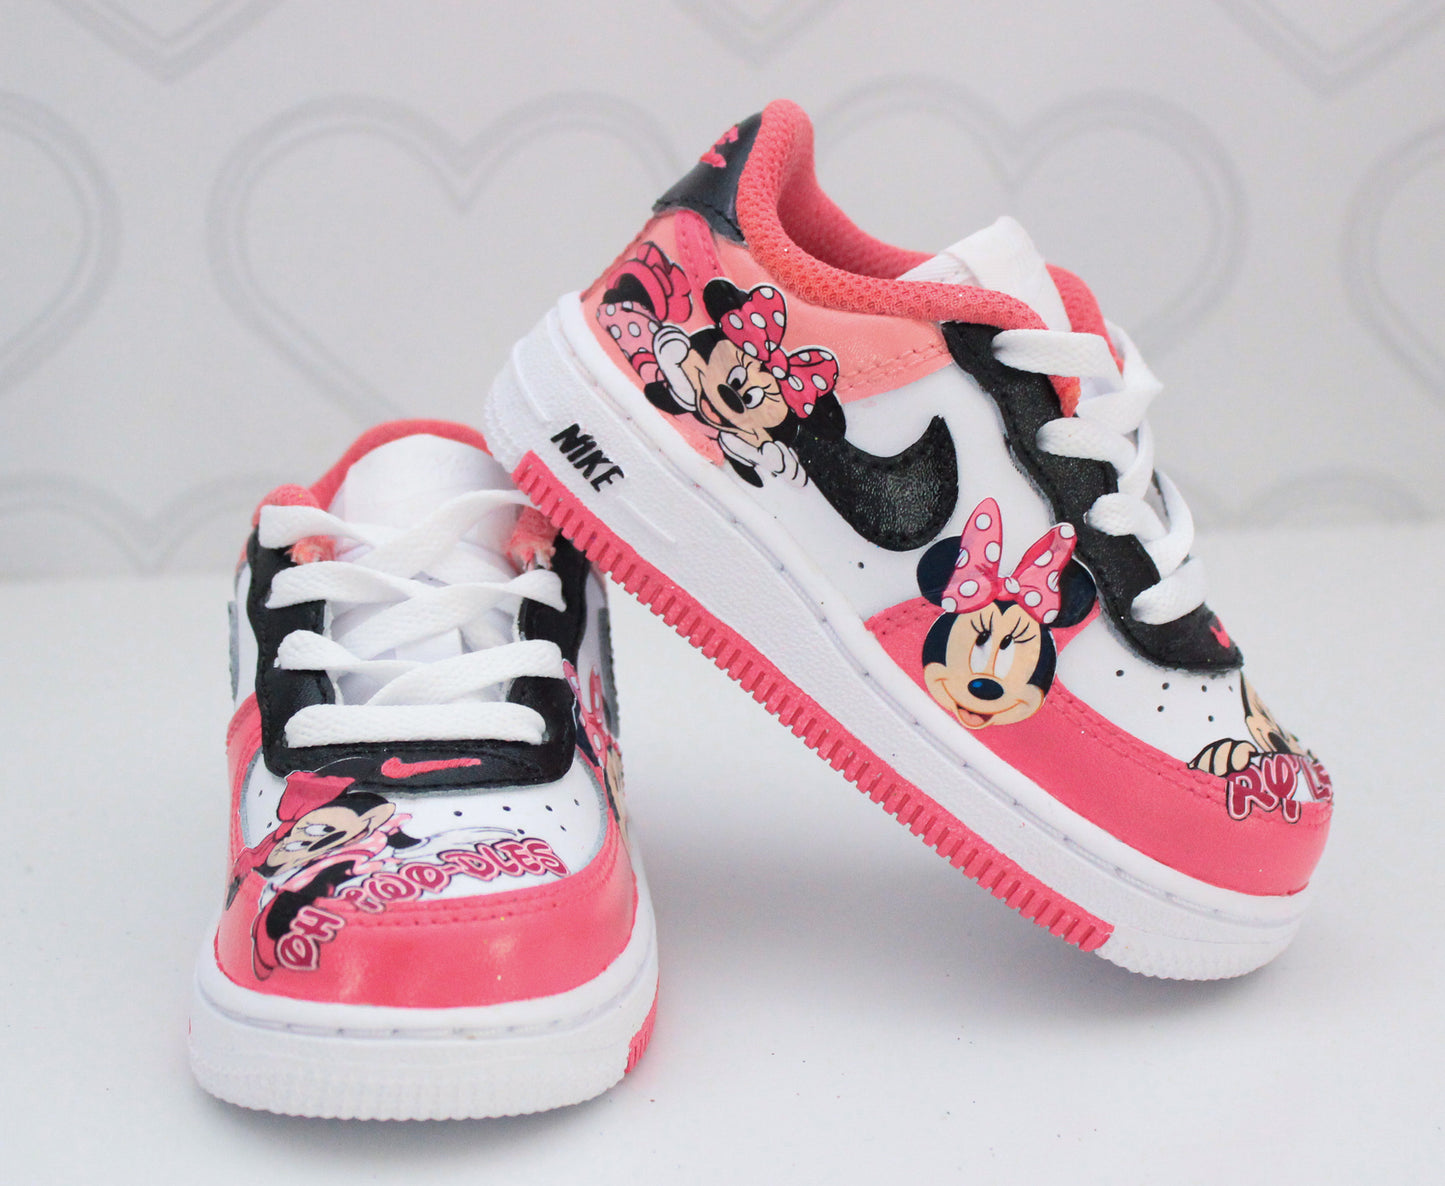 Minnie Mouse shoes-Minnie mouse air force 1's -Girls af1's Shoes-Custom air force 1's- Toddler air force 1's